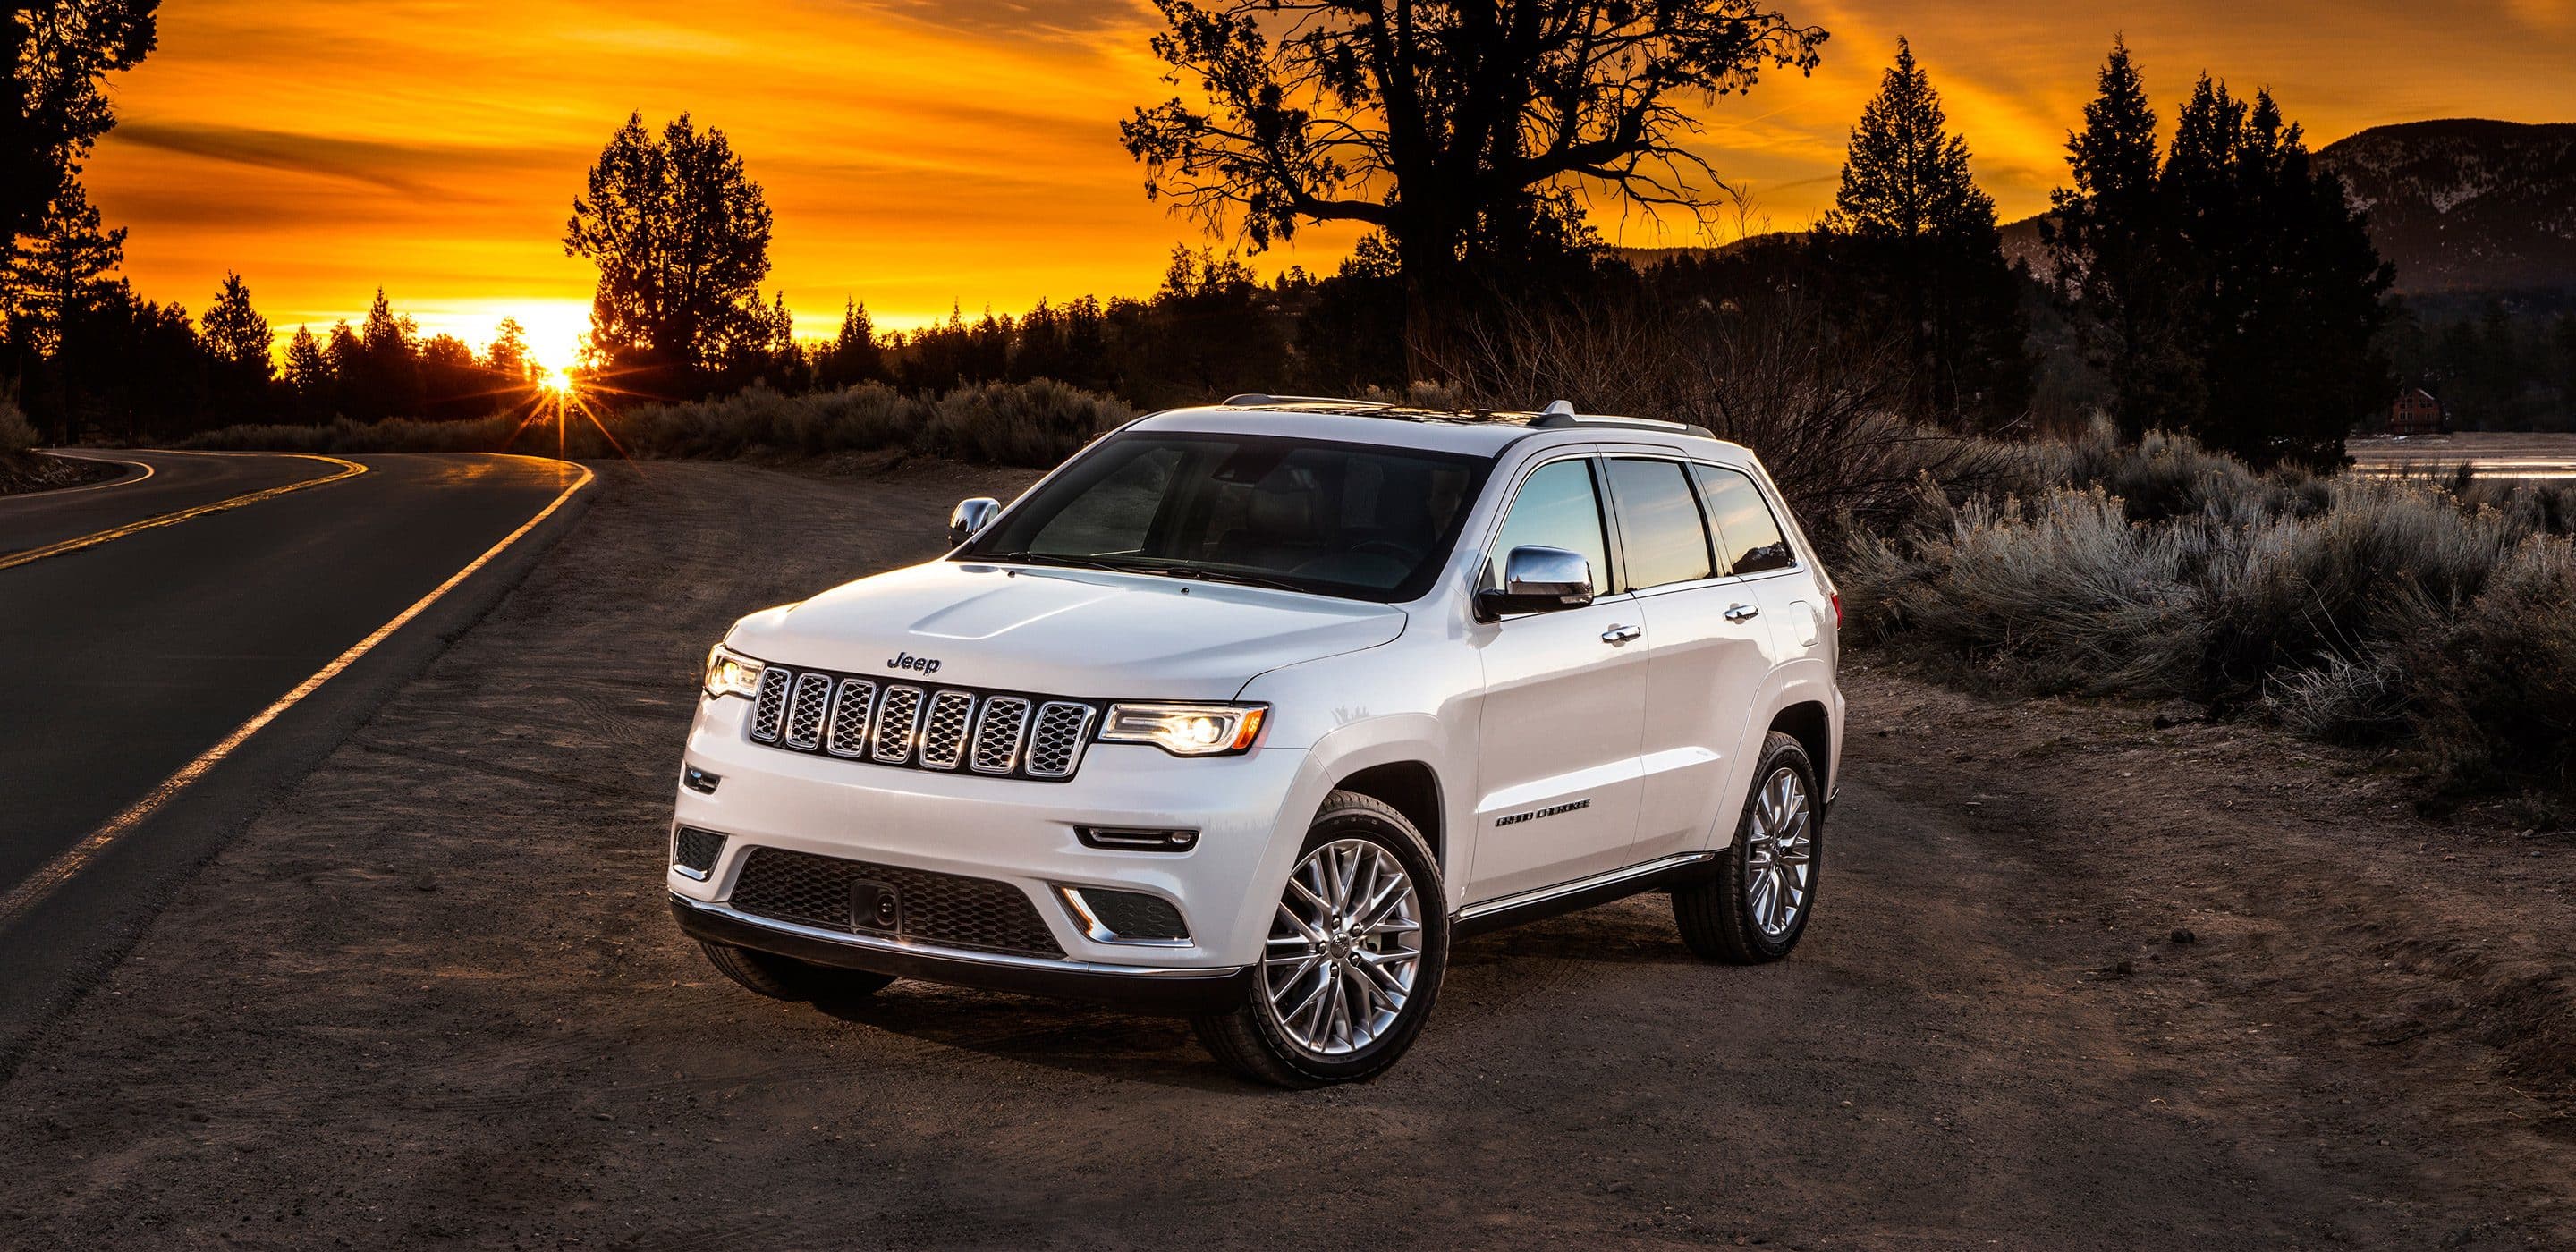 2017 Jeep Grand Cherokee Review & Compare in Boise, ID 2017 Jeep Grand Cherokee Altitude Towing Capacity